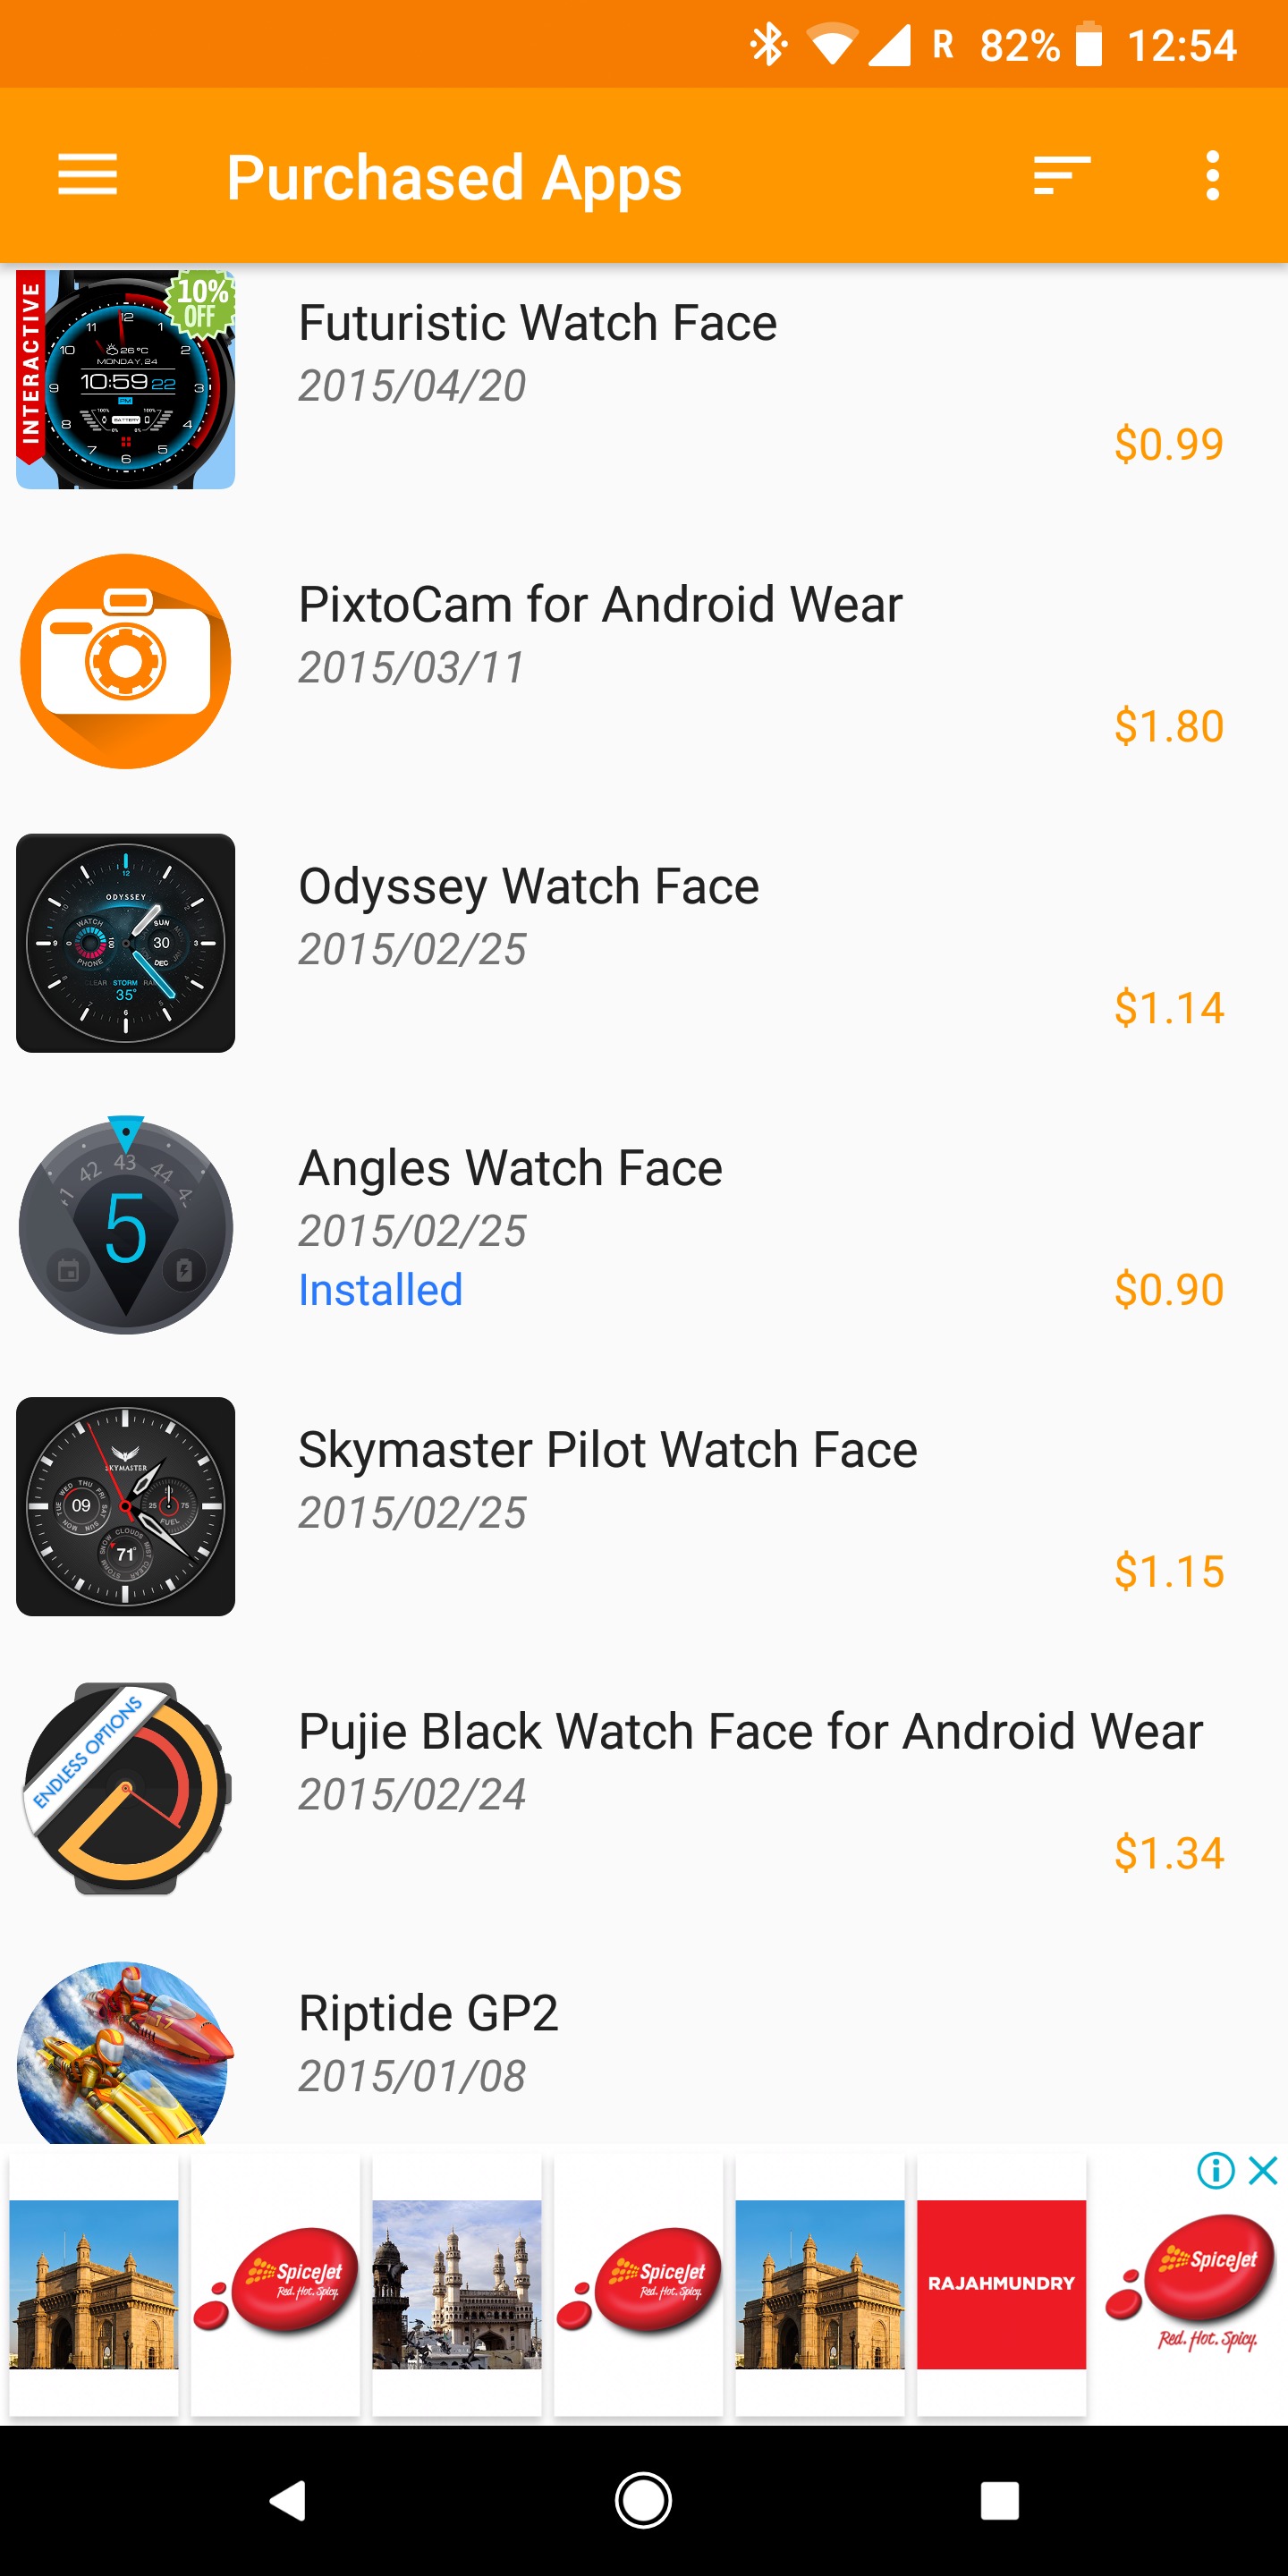 purchased apps google play store